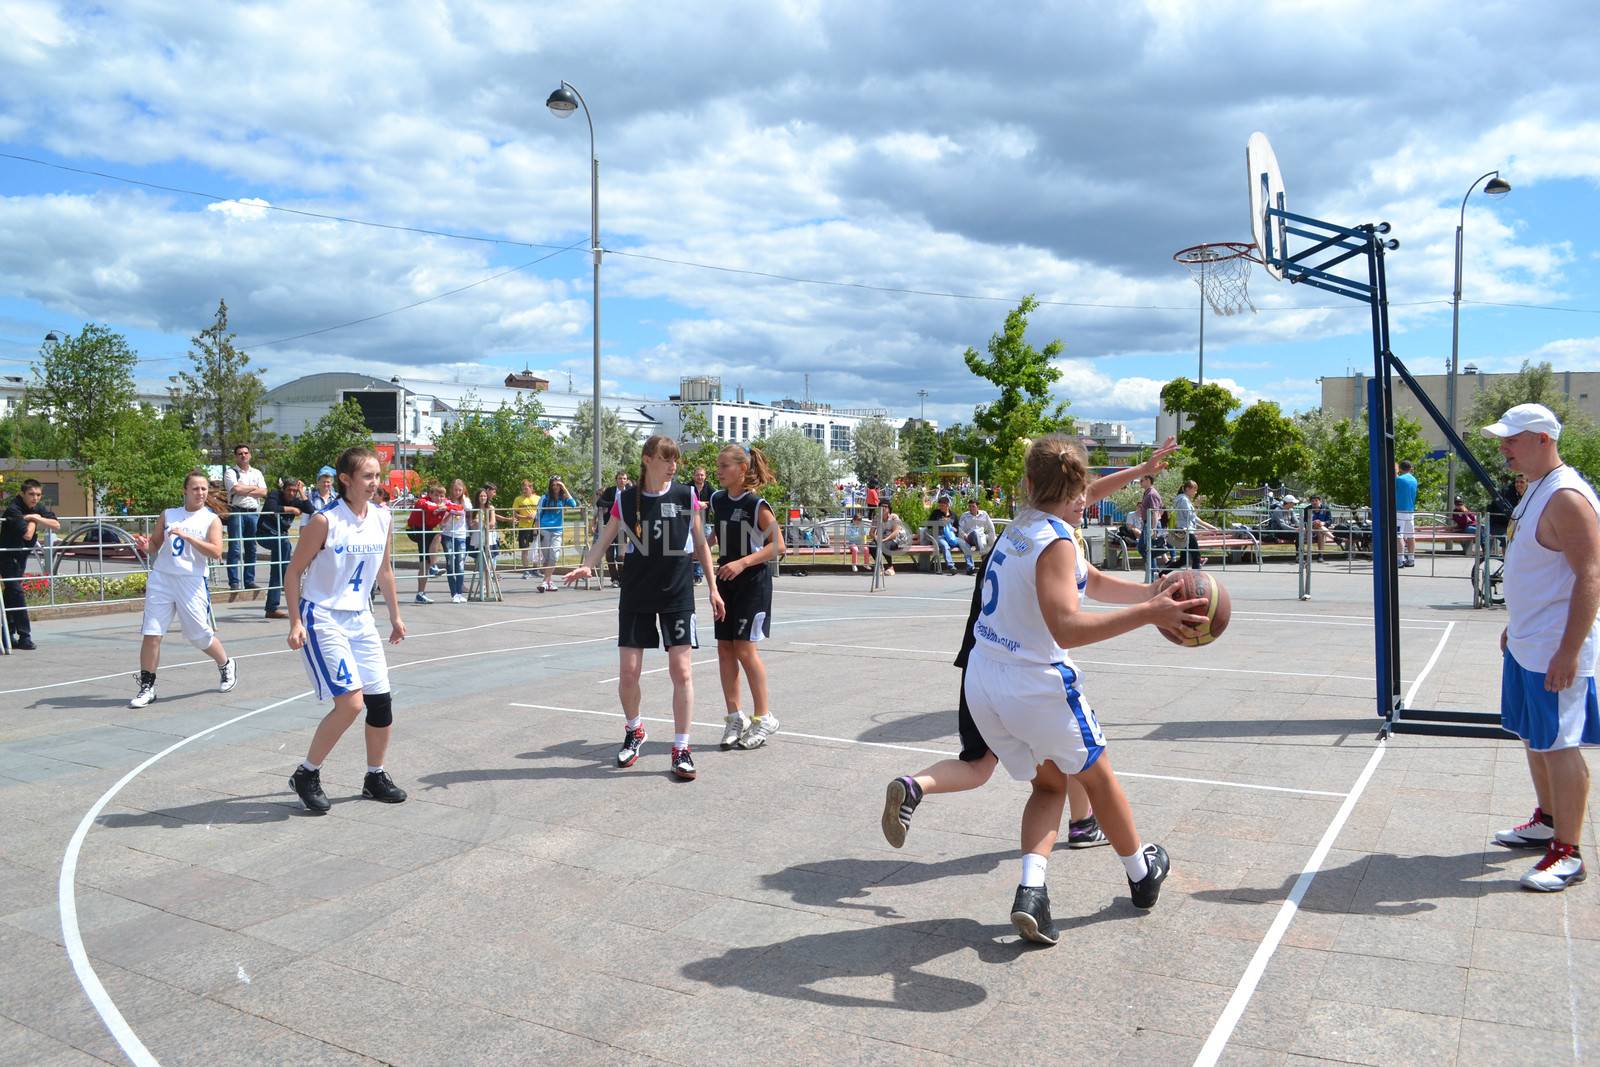 Day of youth of 2013, Tyumen. Basketball competitions in Tsvetnoy Boulevard.